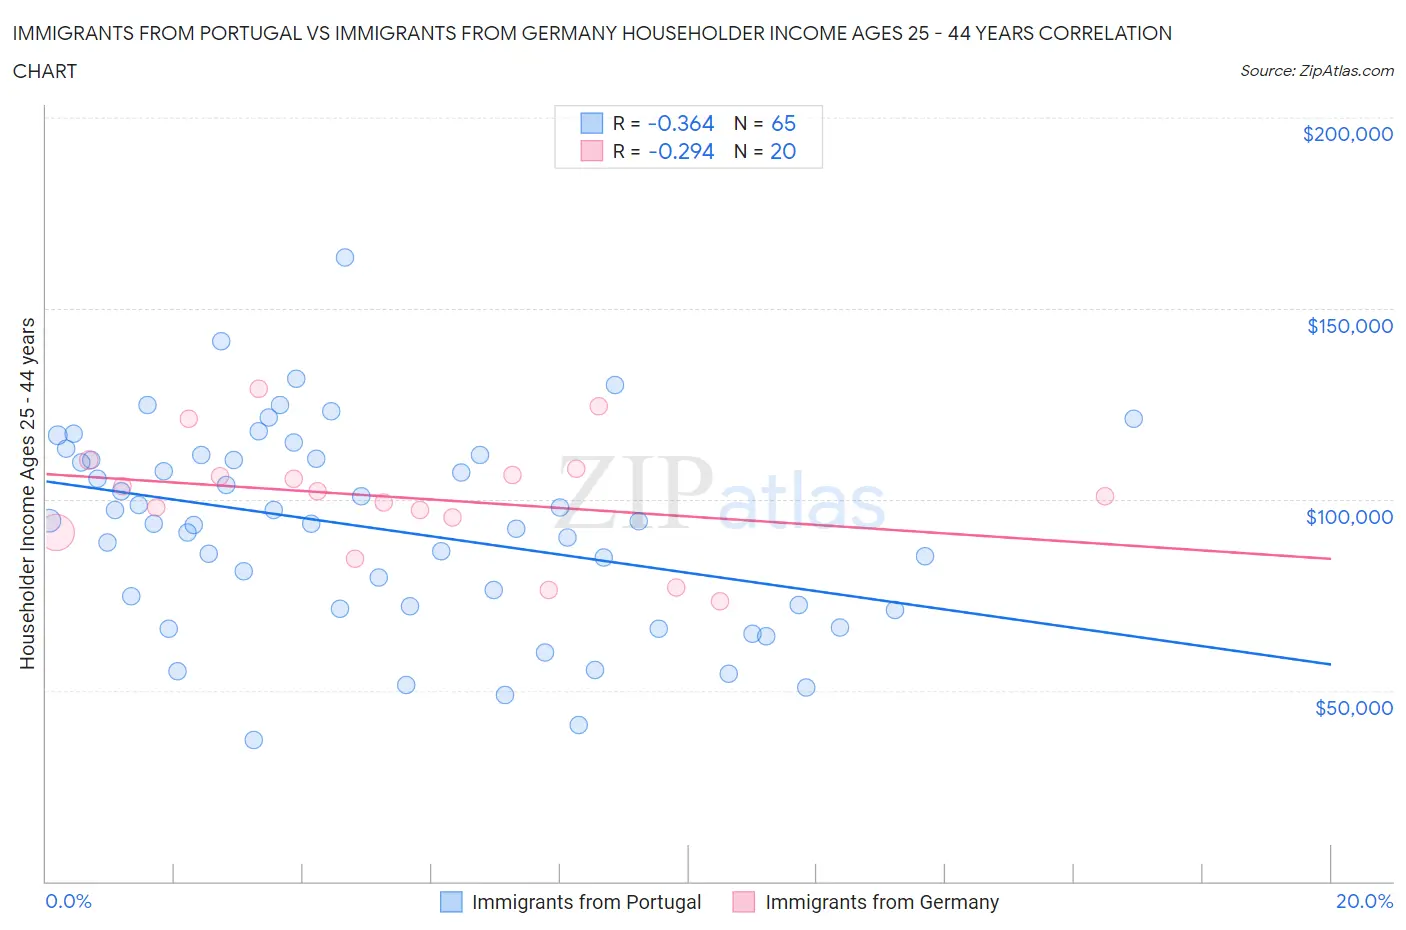 Immigrants from Portugal vs Immigrants from Germany Householder Income Ages 25 - 44 years